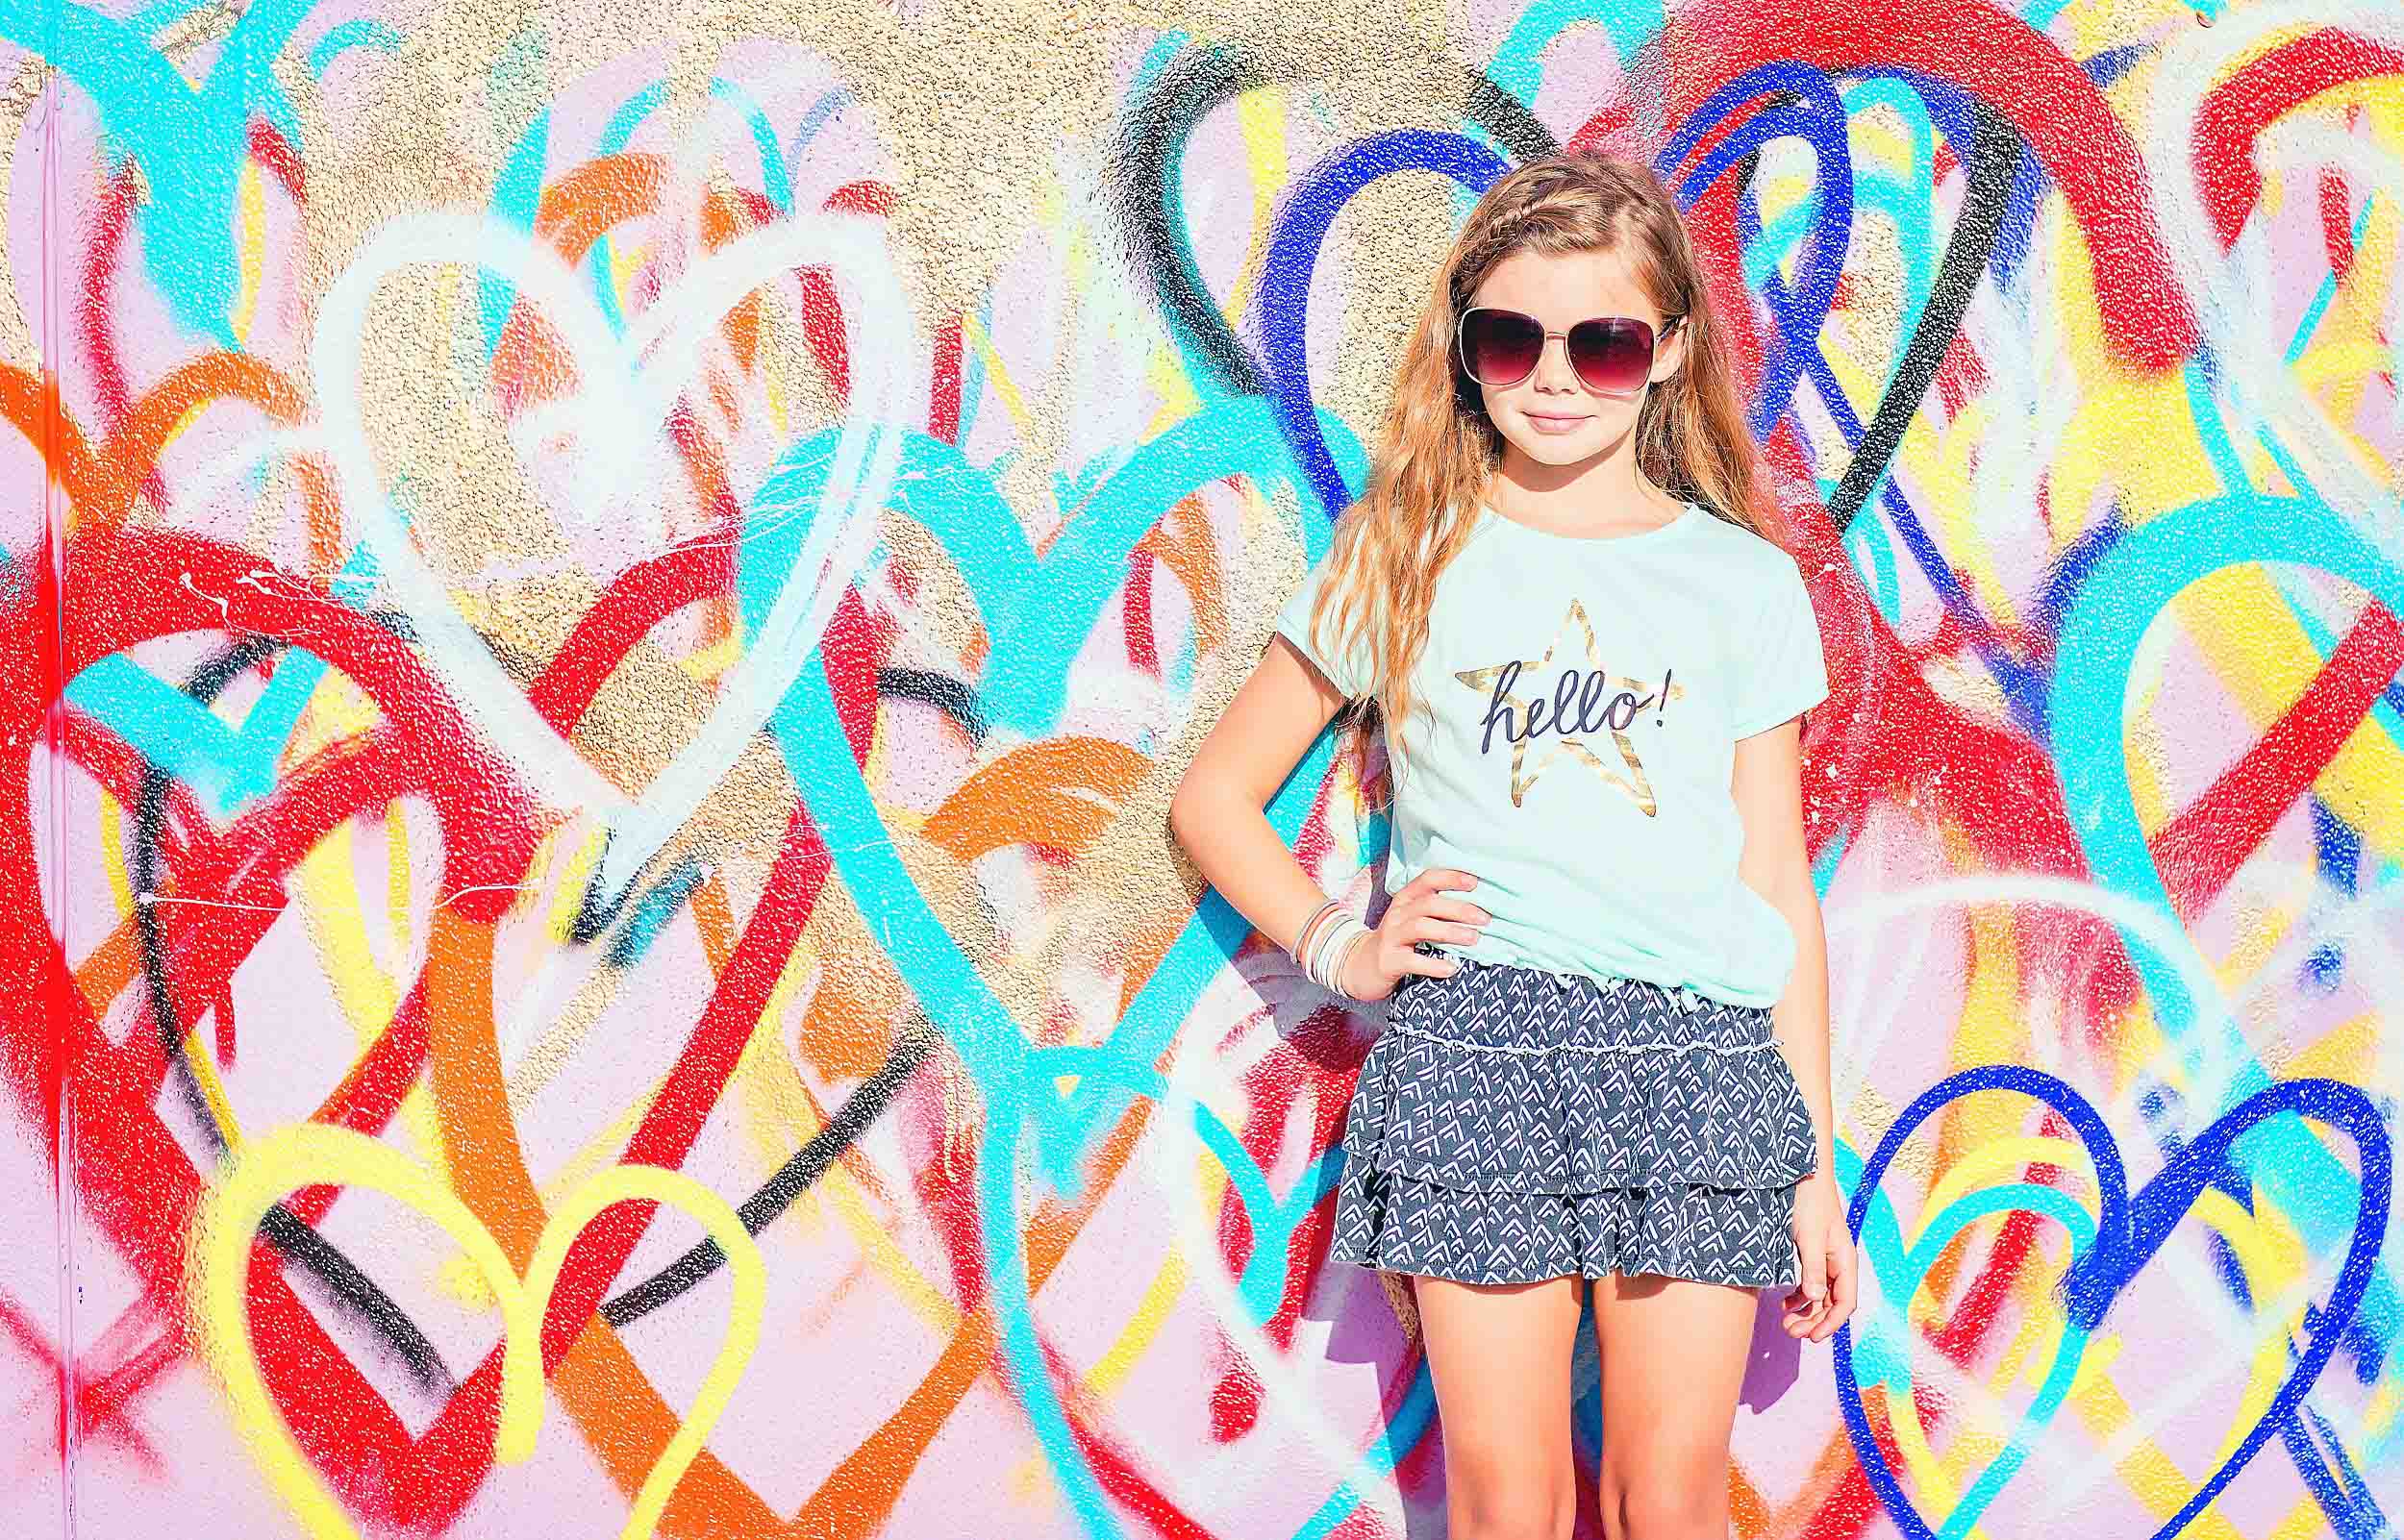  Colorful portrait of young girl against wall art in Houston, Texas. 